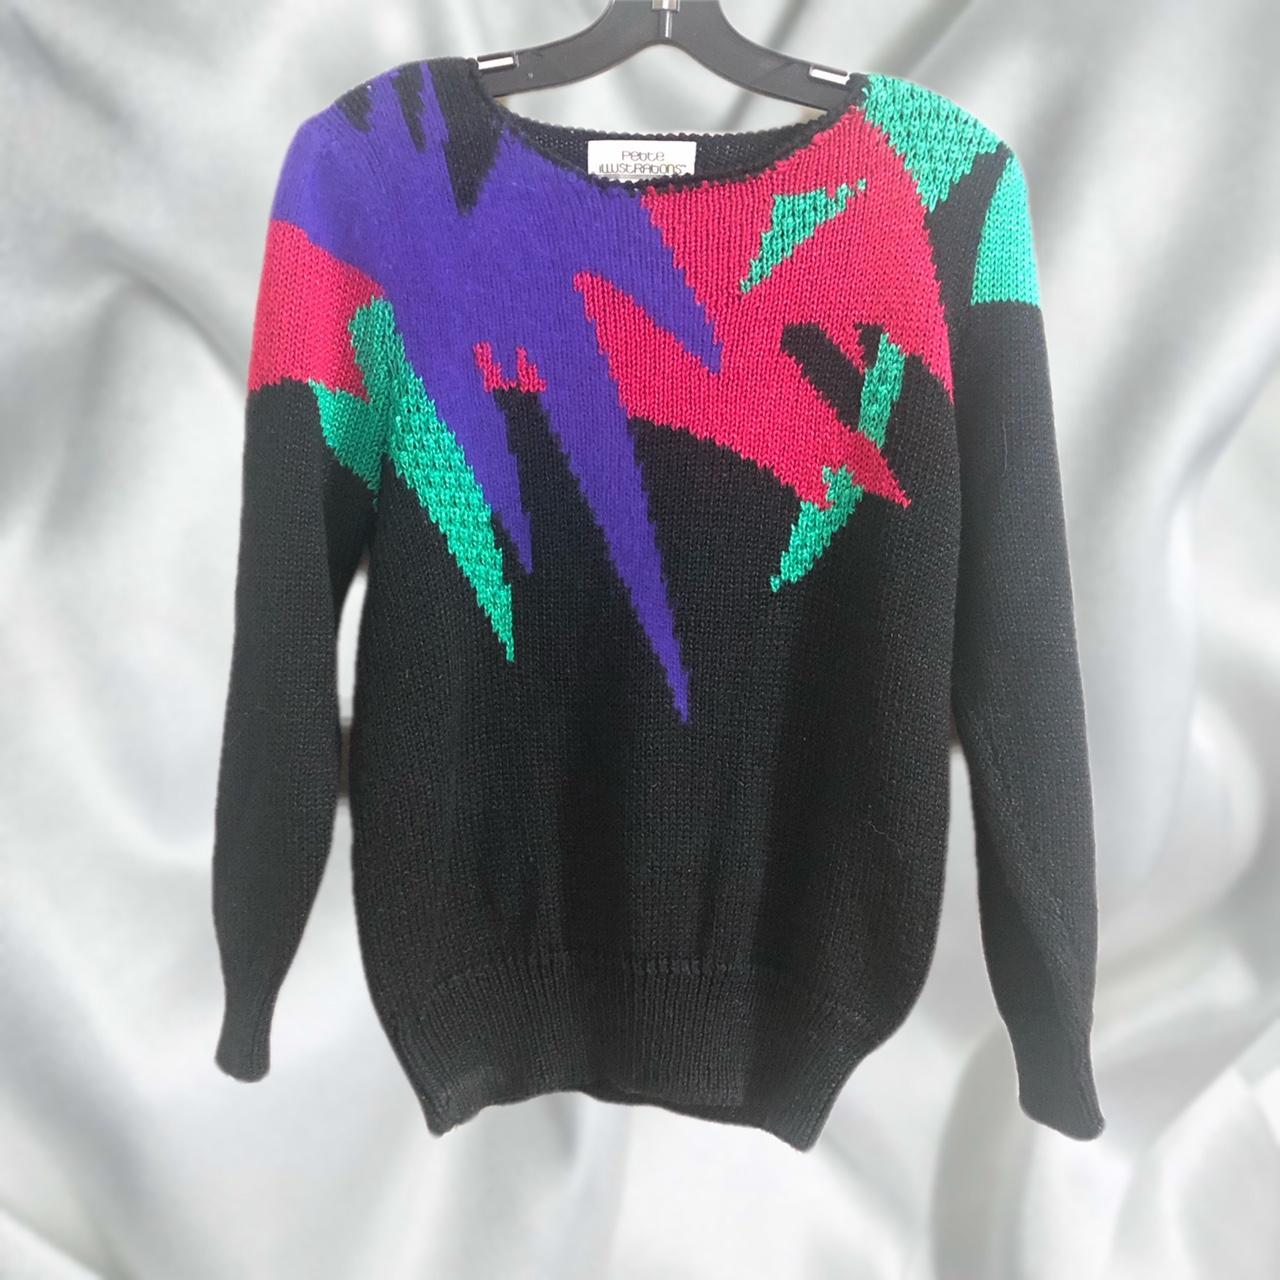 Vintage Abstract Neon Knit Sweater by Petite... - Depop